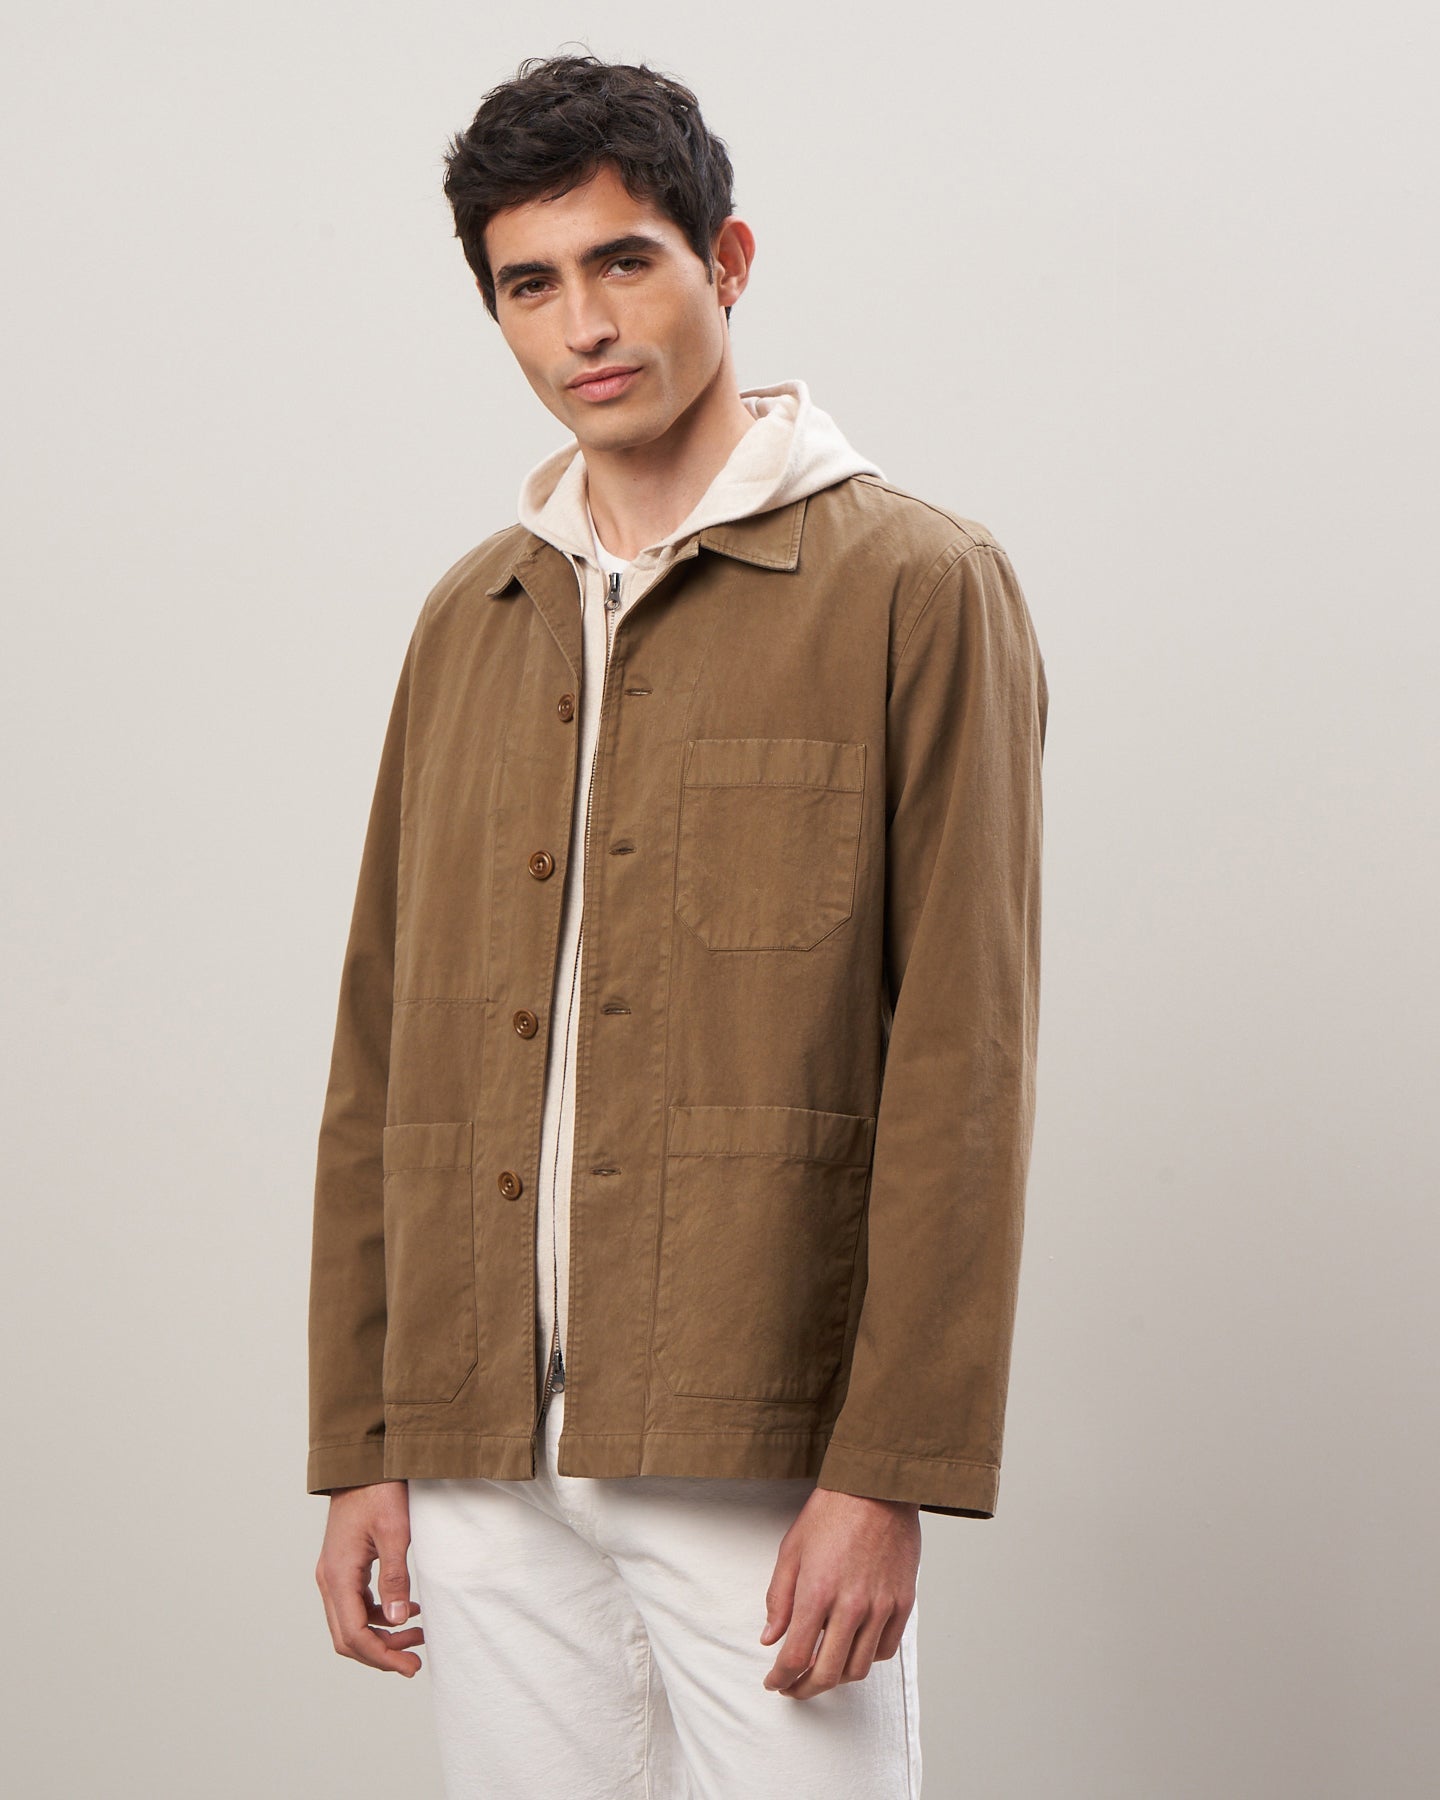 Veste Homme chino Taupe Perry BB28111-79